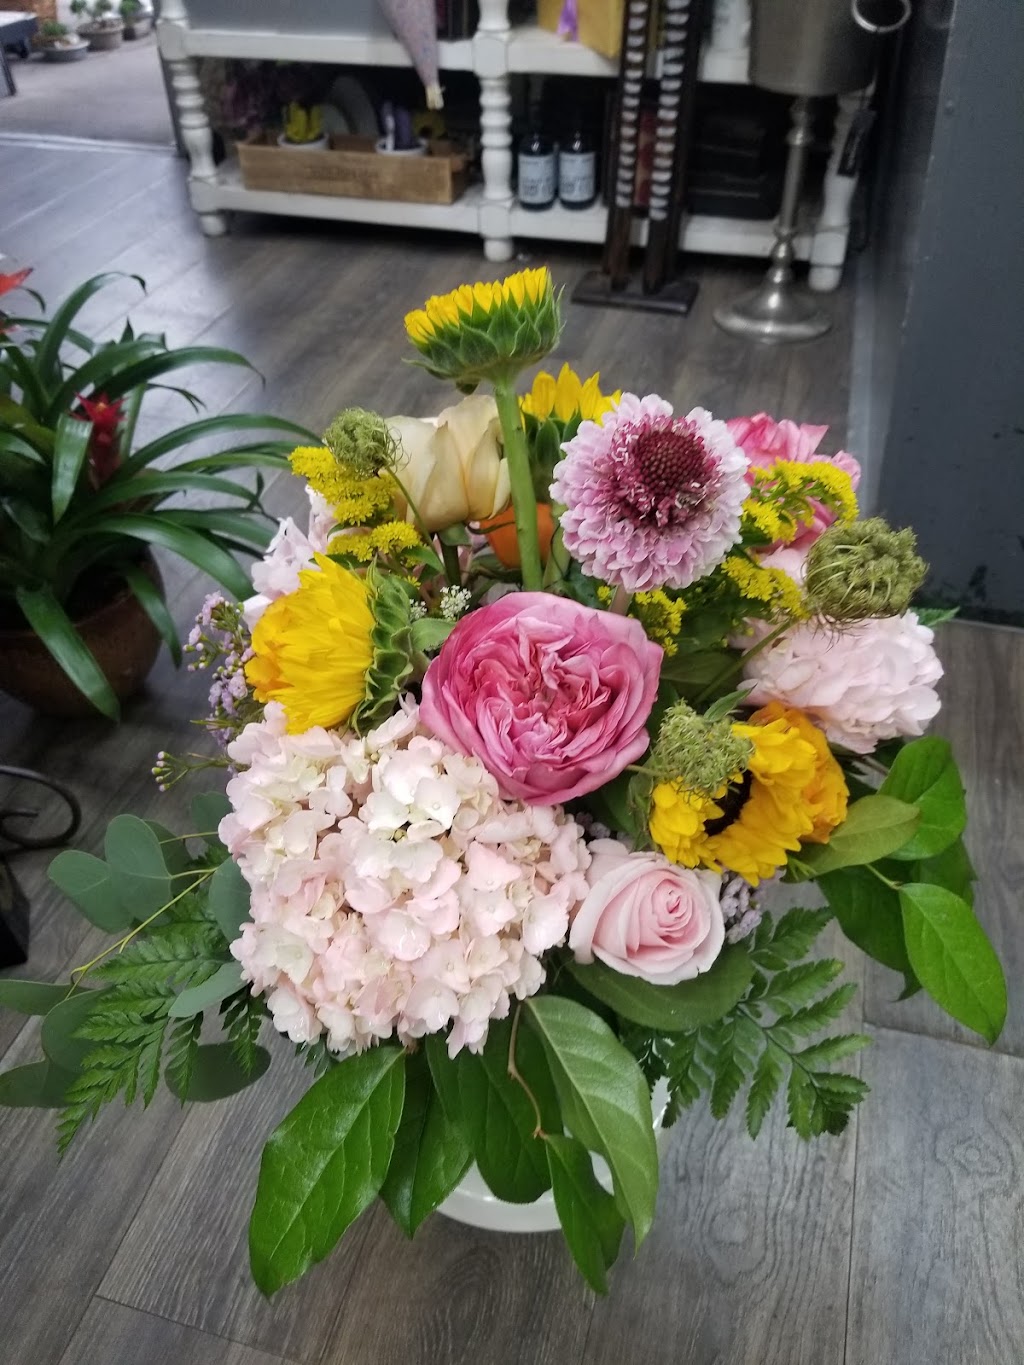 Deep Dale Florist | 249-02 Horace Harding Expy, Queens, NY 11362 | Phone: (718) 423-8988